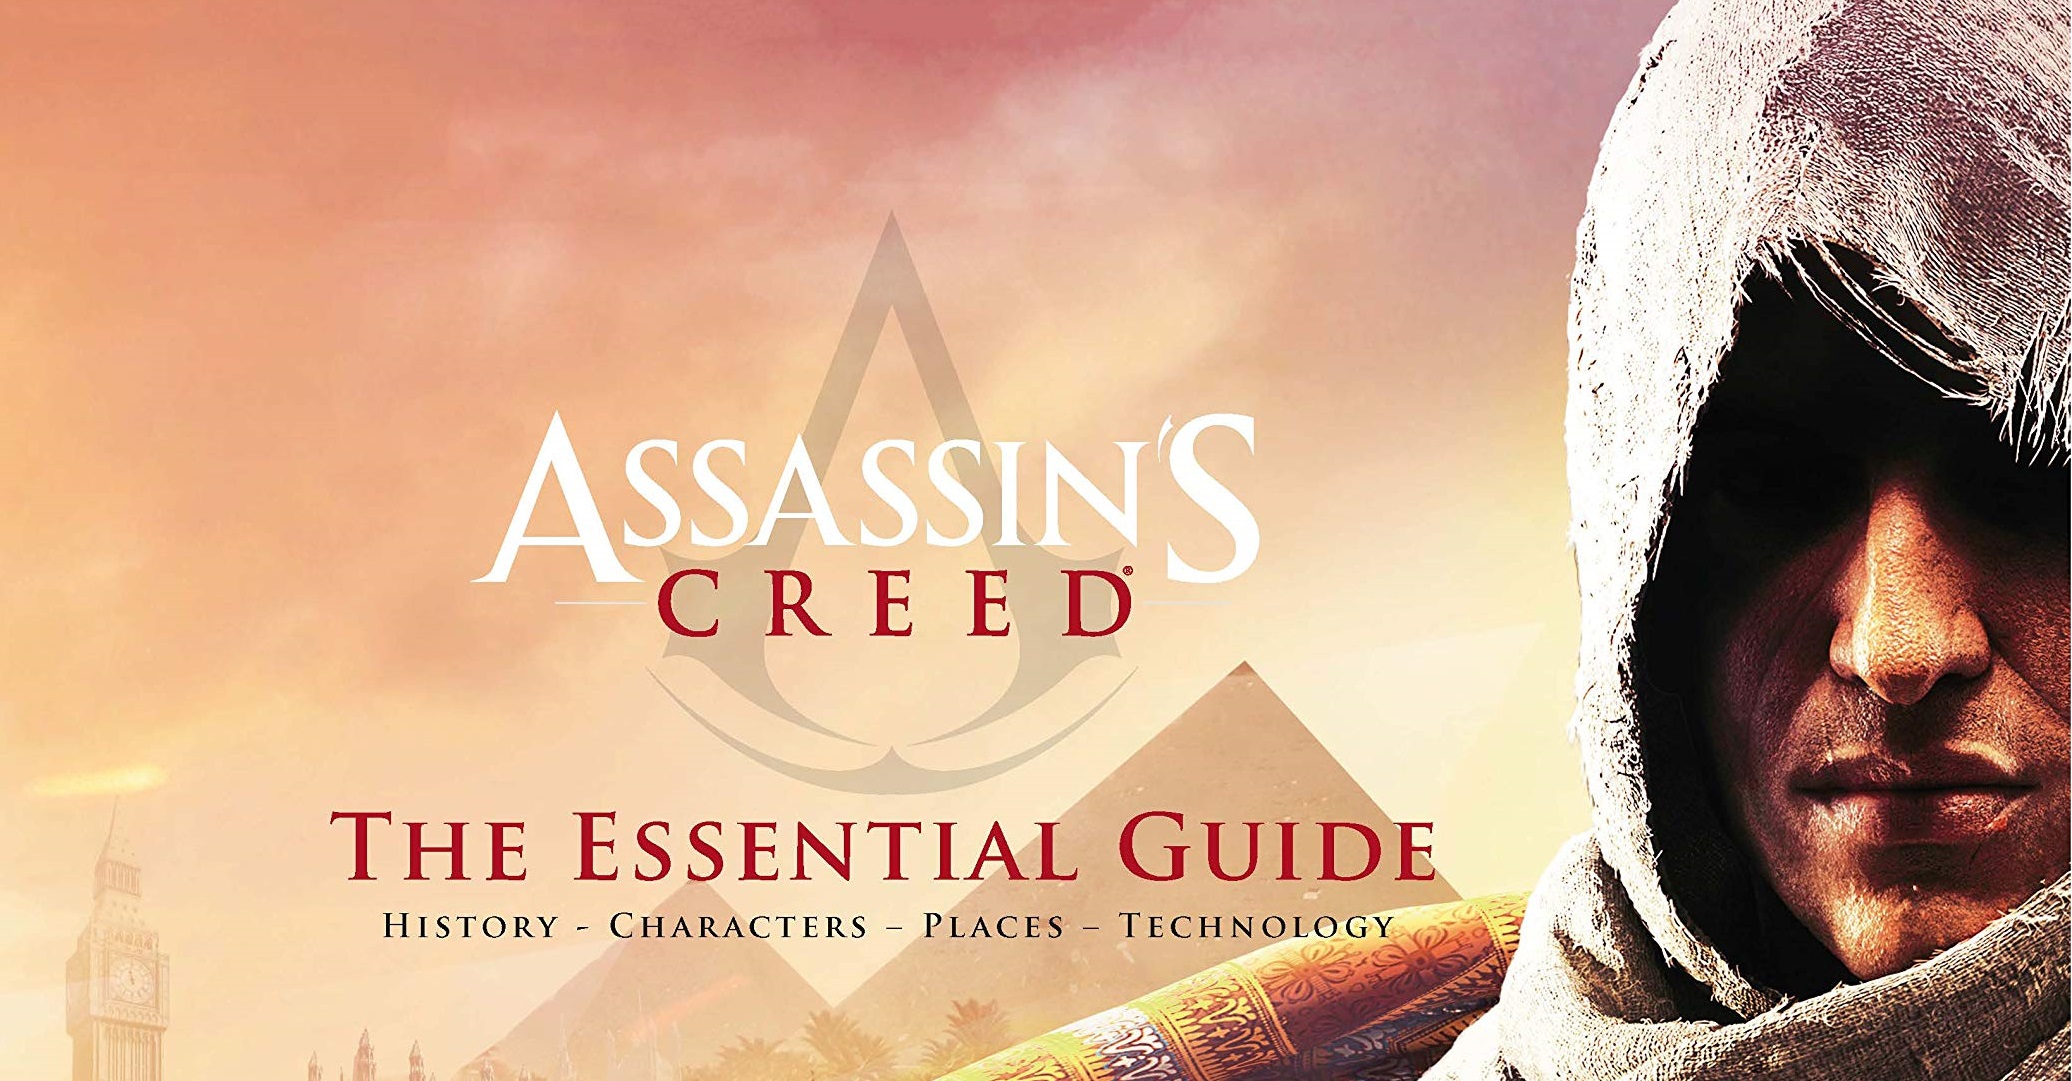 Assassins Creed The Essential Guide Front Cover 1